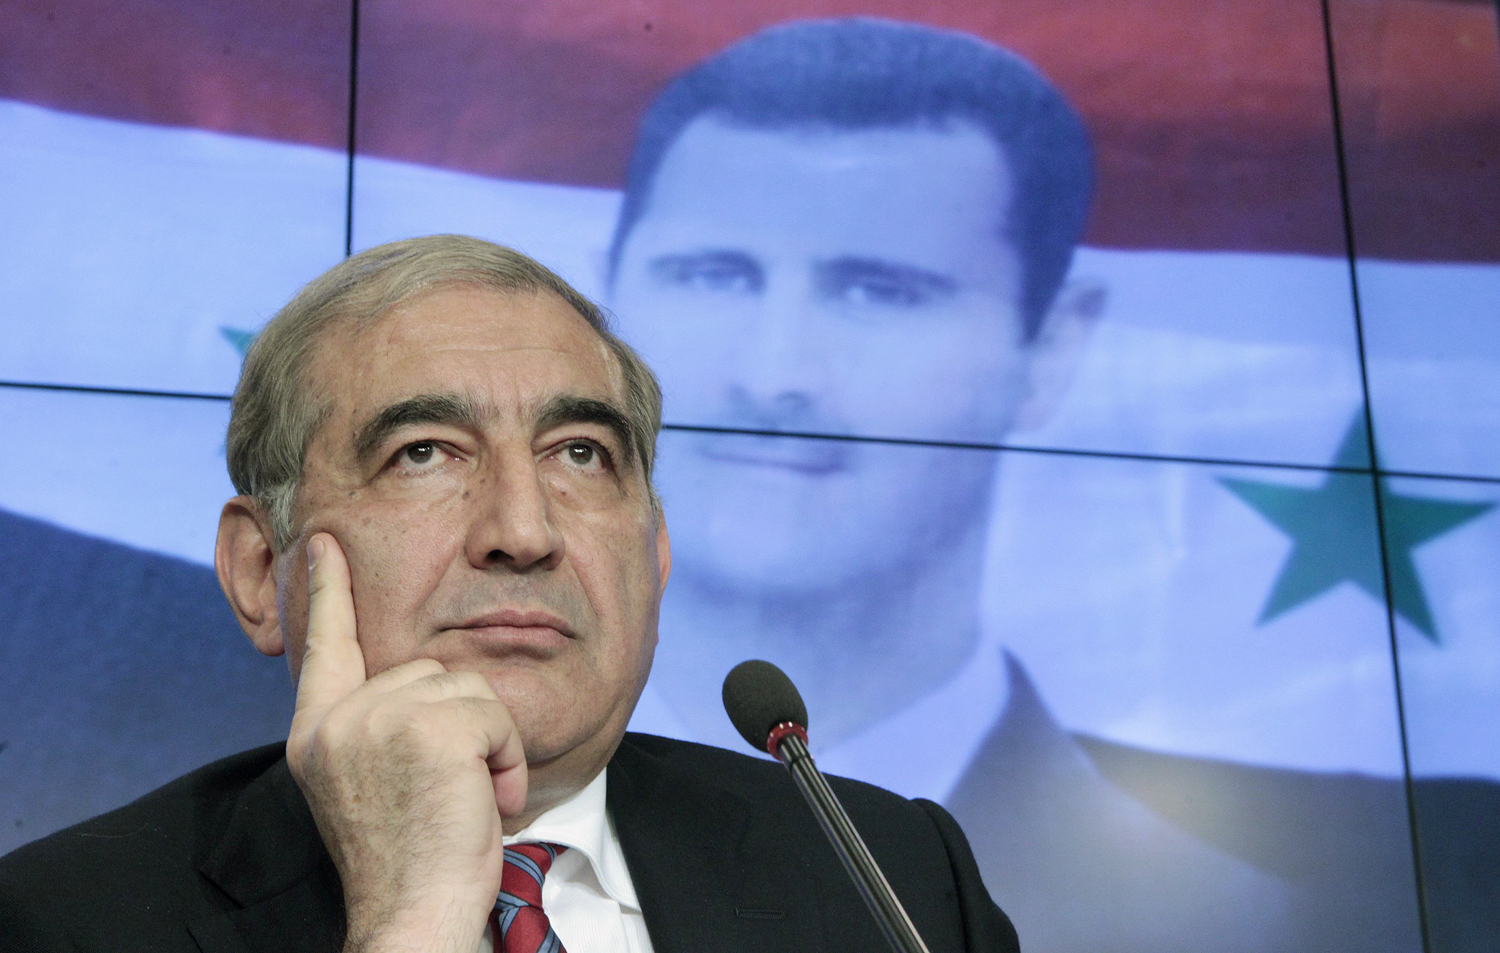 Qadri Jamil, Syria's deputy prime minister for economic affairs, listens during a news conference in Moscow, Aug. 21, 2012. The Syrian government said on Tuesday foreign military intervention in Syria was "impossible" because it would lead to a conflict beyond the country's borders.